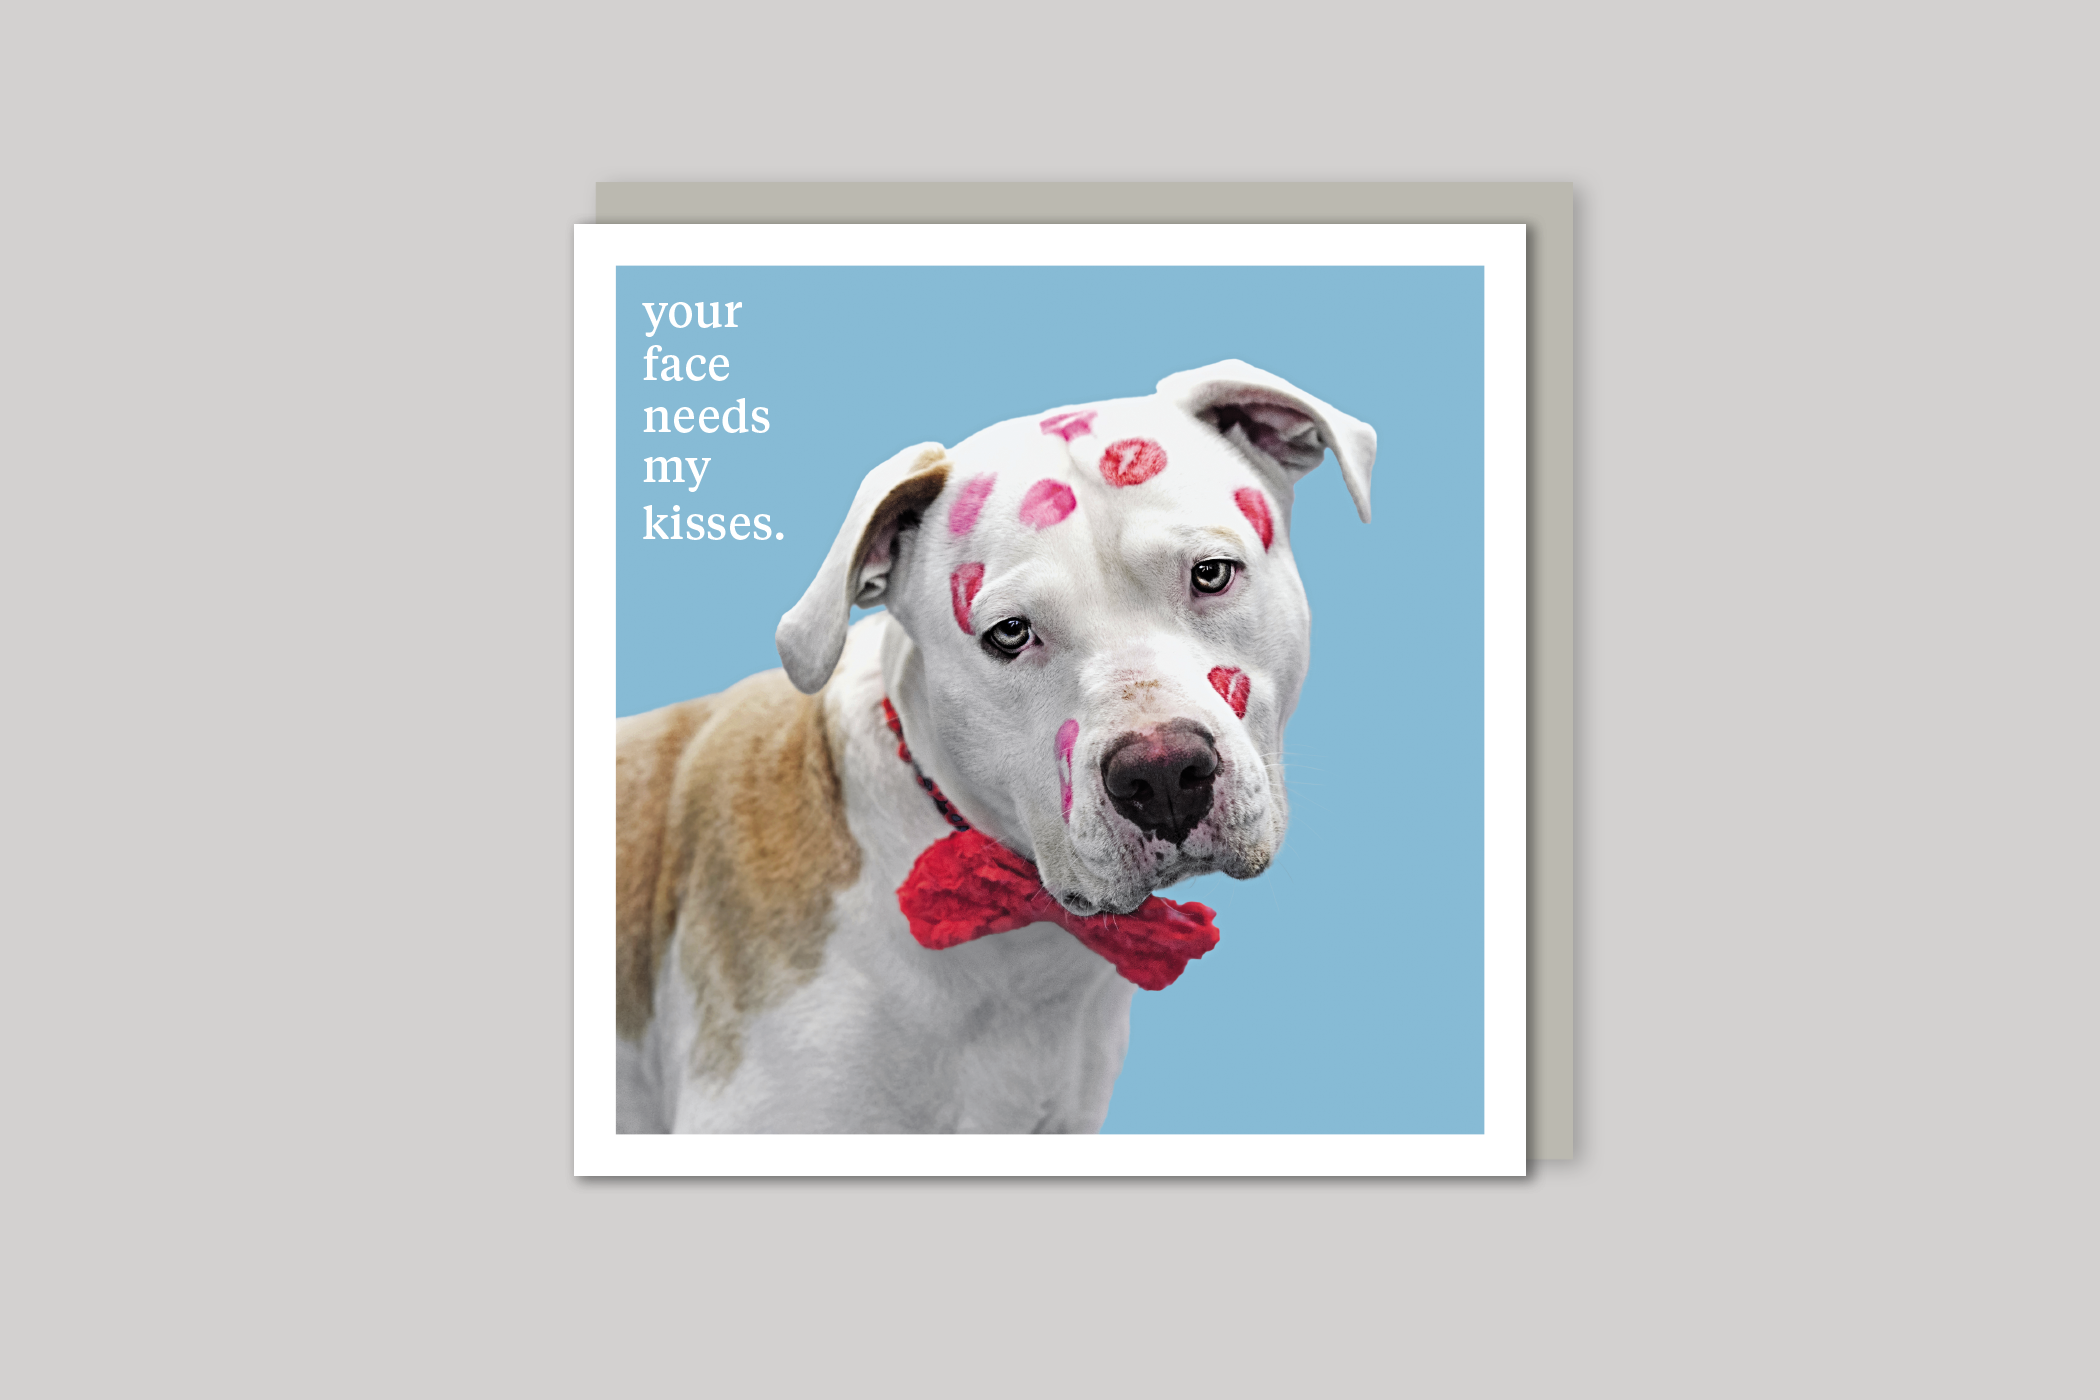 My Kisses quirky animal portrait from Curious World range of greeting cards by Icon, back page.